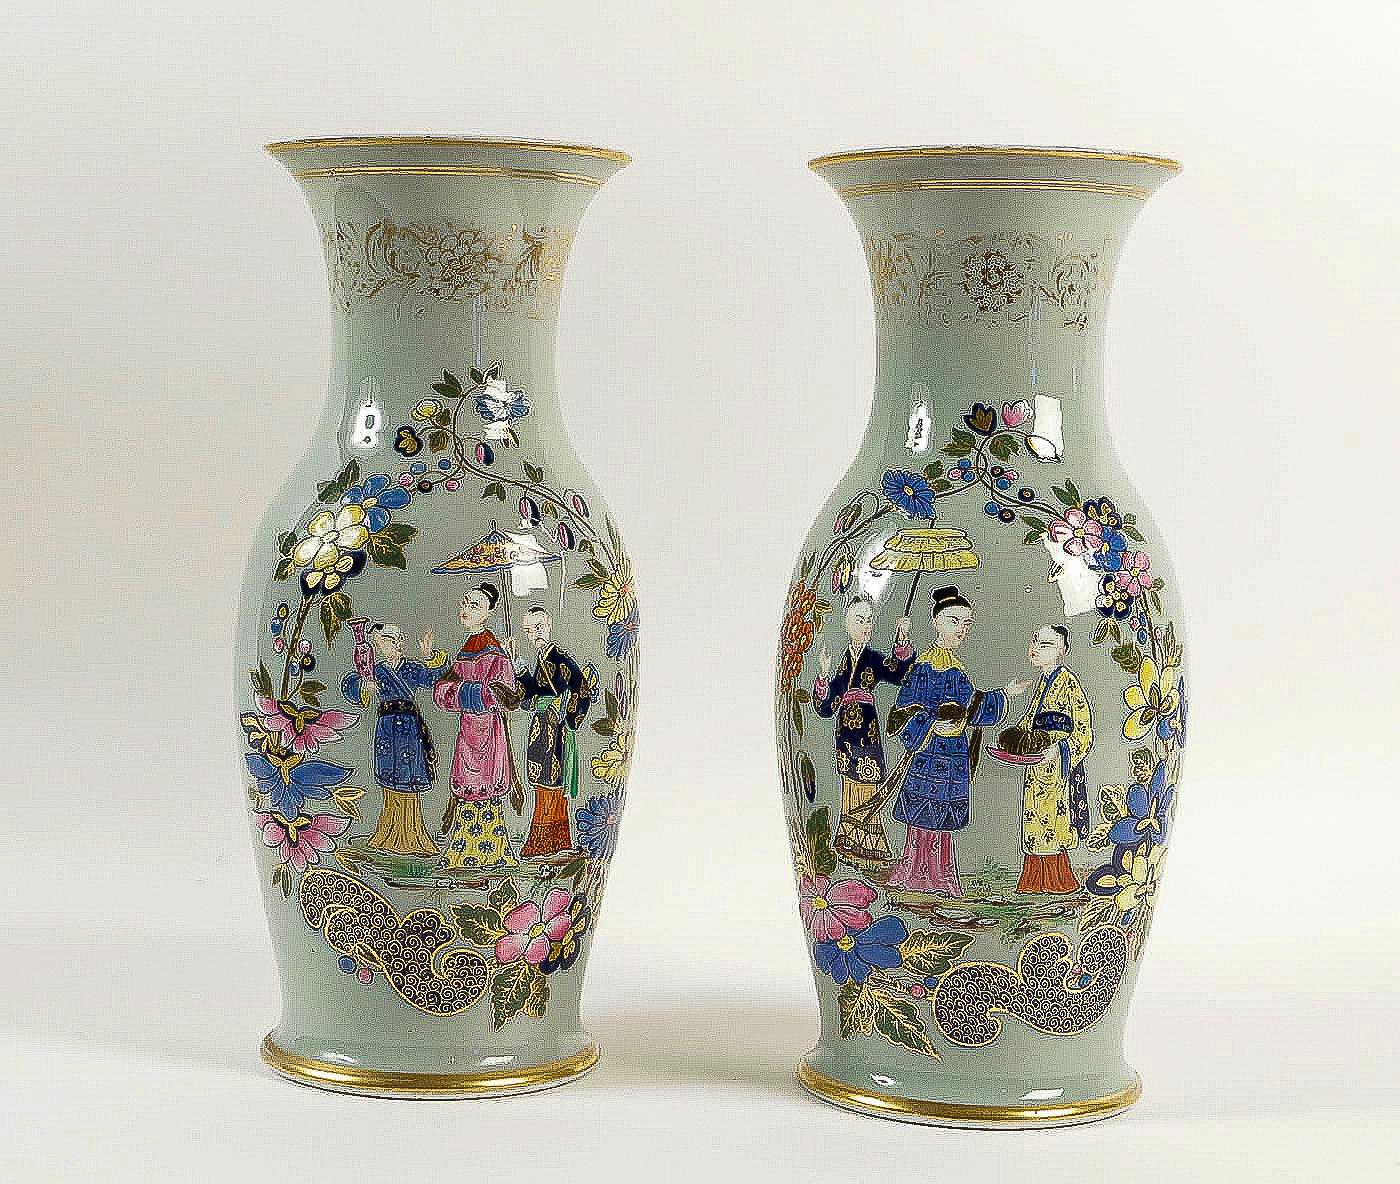 We are pleased to present to you, an excellent and decorative French porcelain pair of vases decorated in the chinoiserie taste. Celadon Family.

Fine quality porcelain of Bayeux Manufacture, circa 1850.

Excellent condition.

Dimensions: